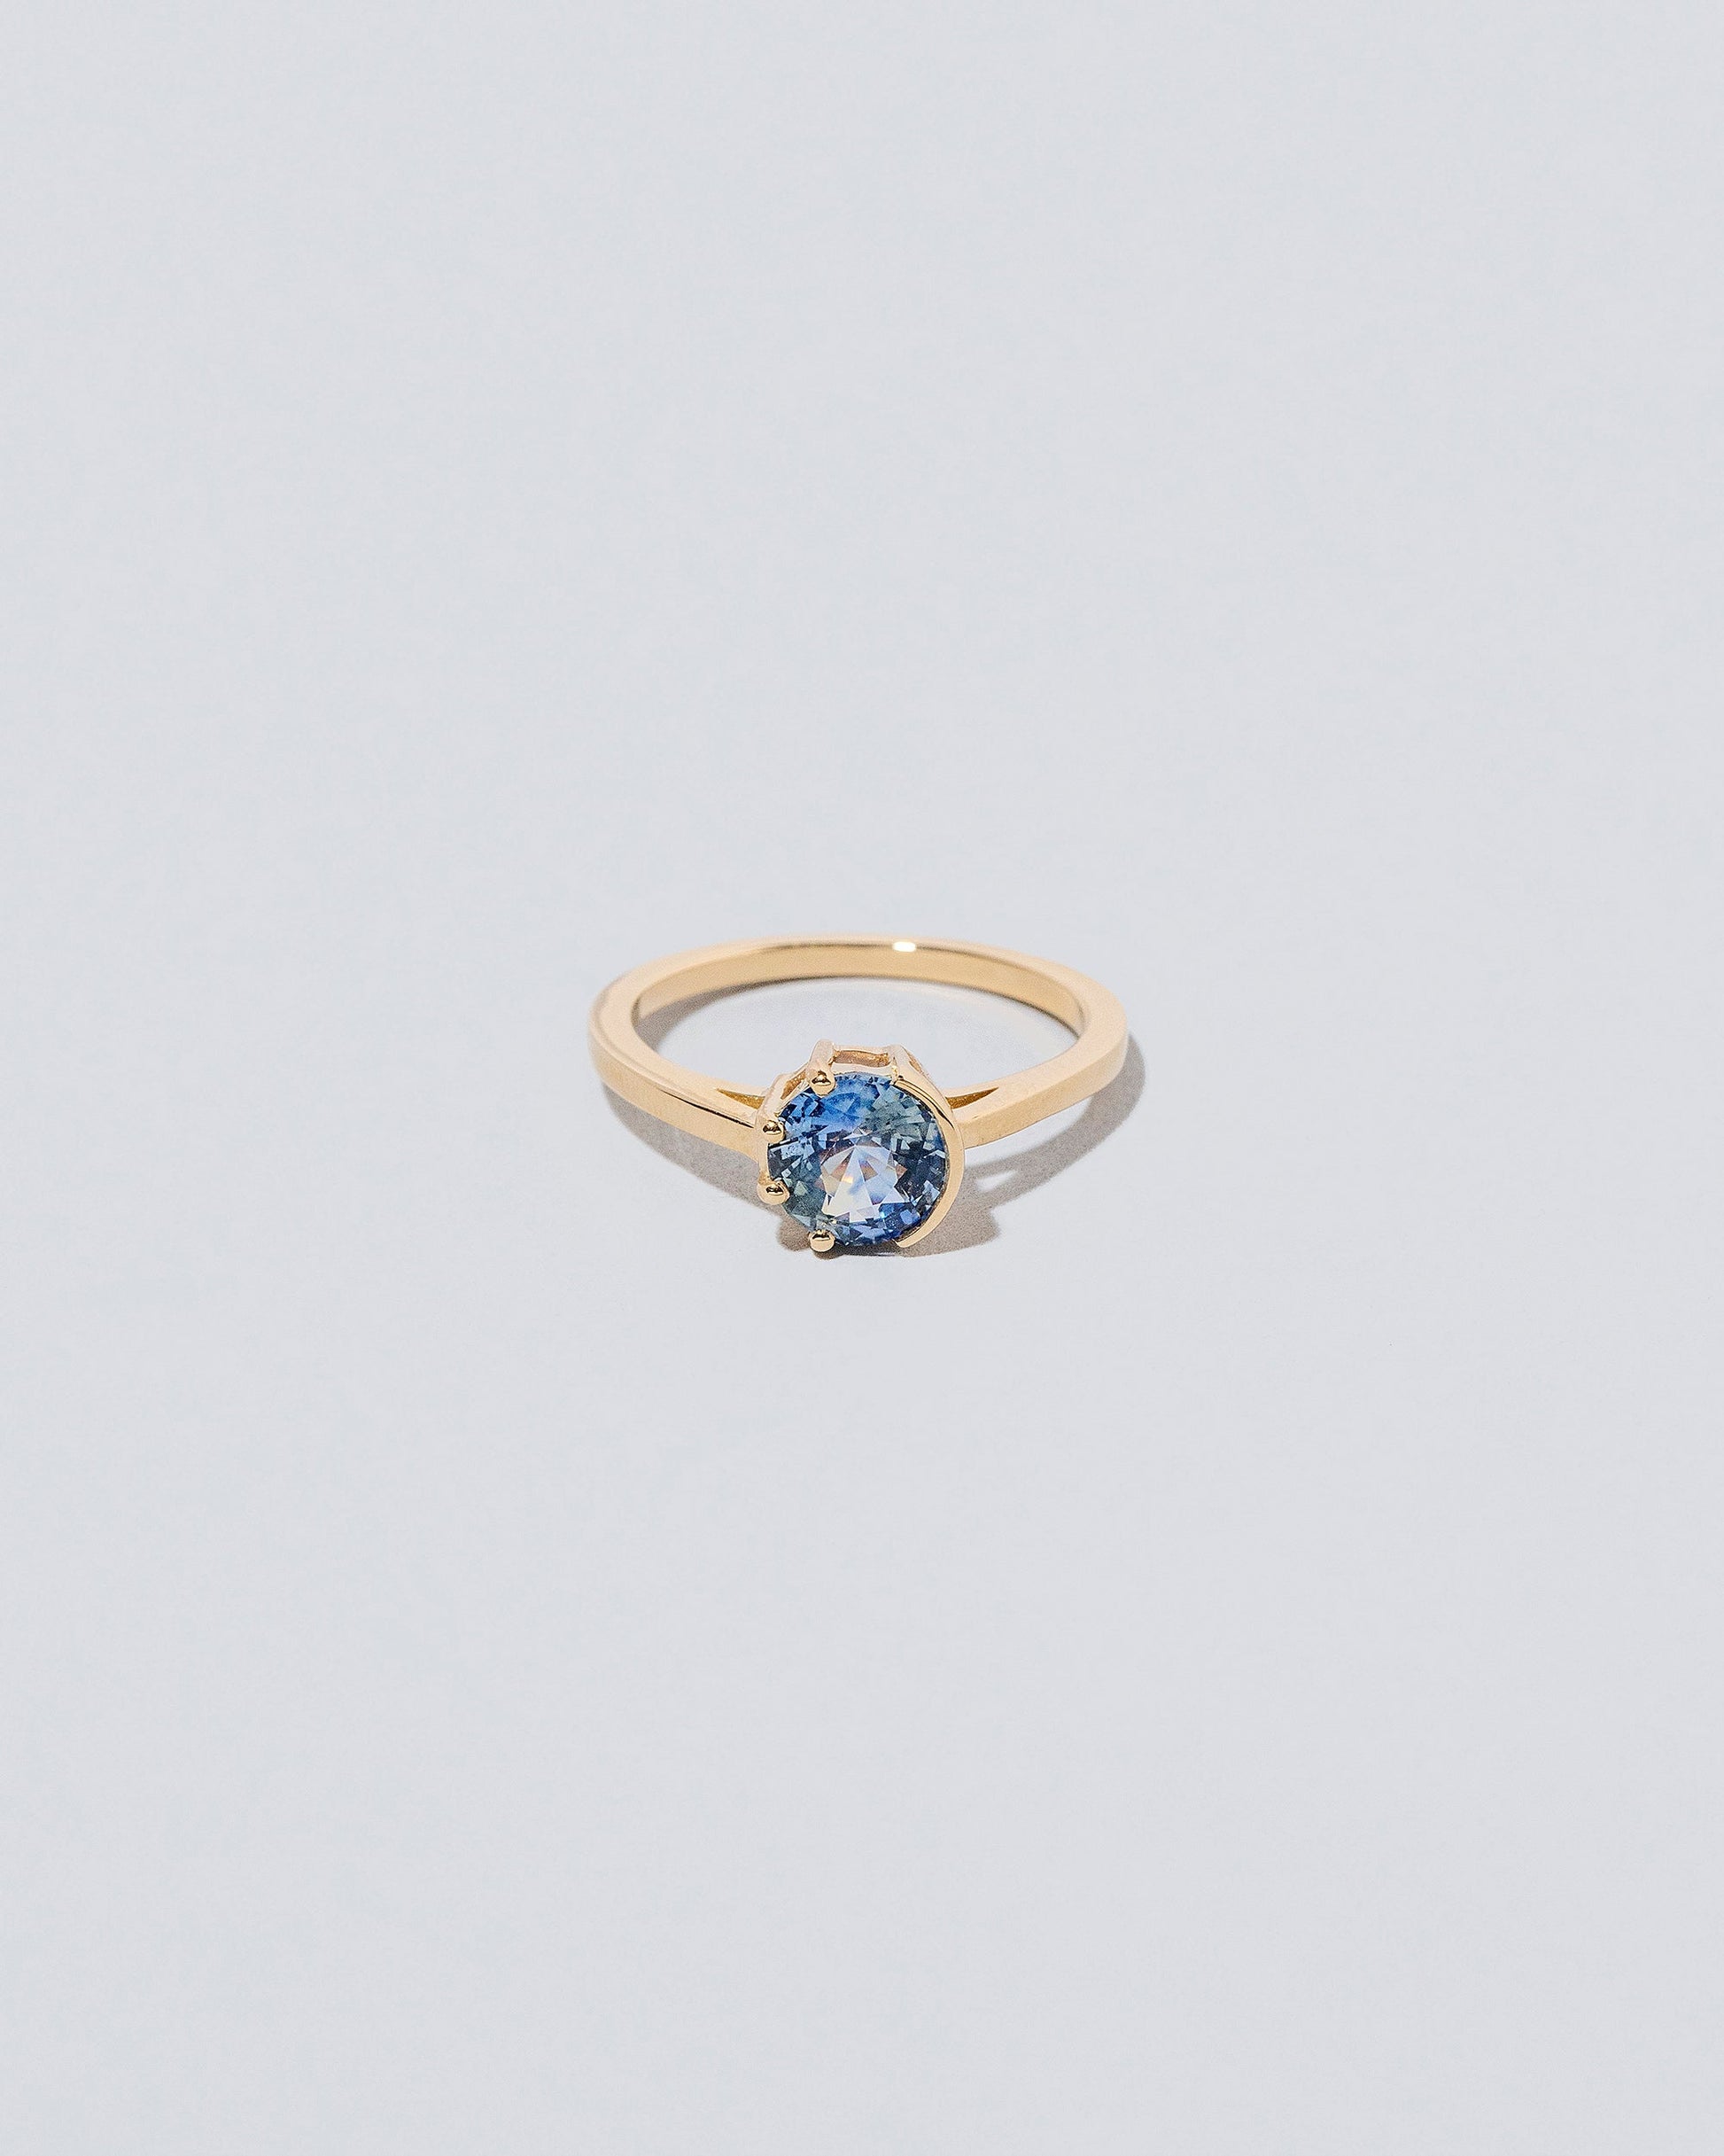 Sun & Moon Ring - Bicolor Sapphire on light color background.